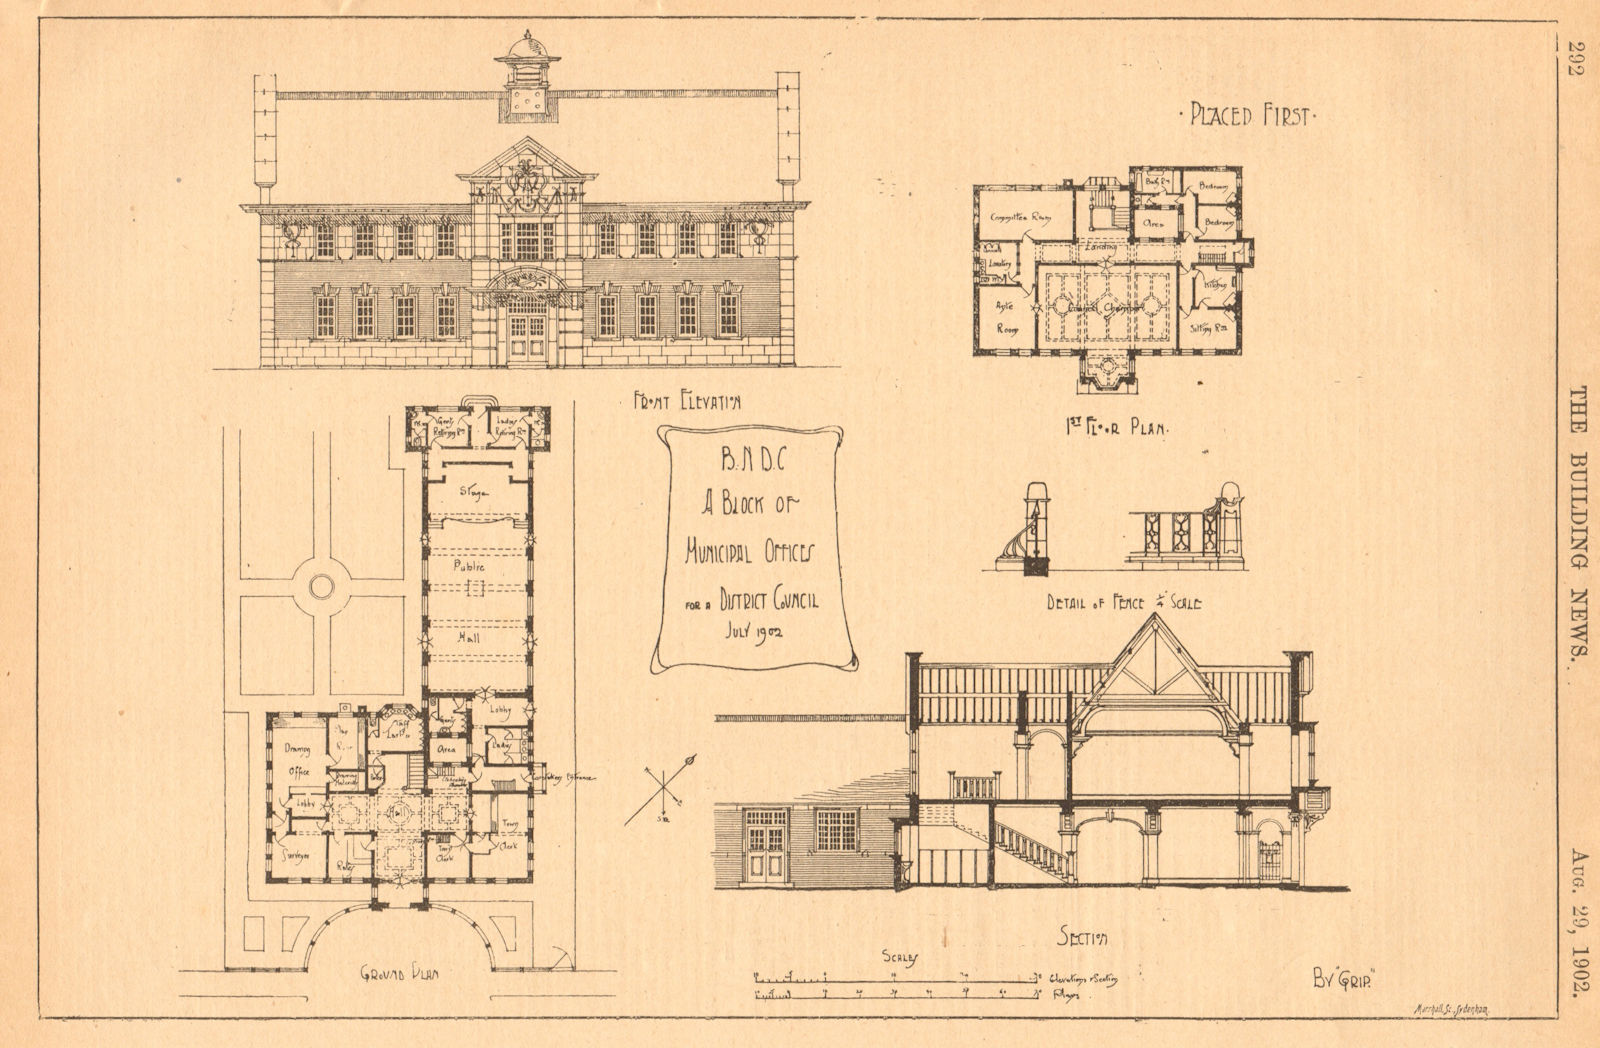 A block of municipal offices for a district council. Plan, elevation 1902